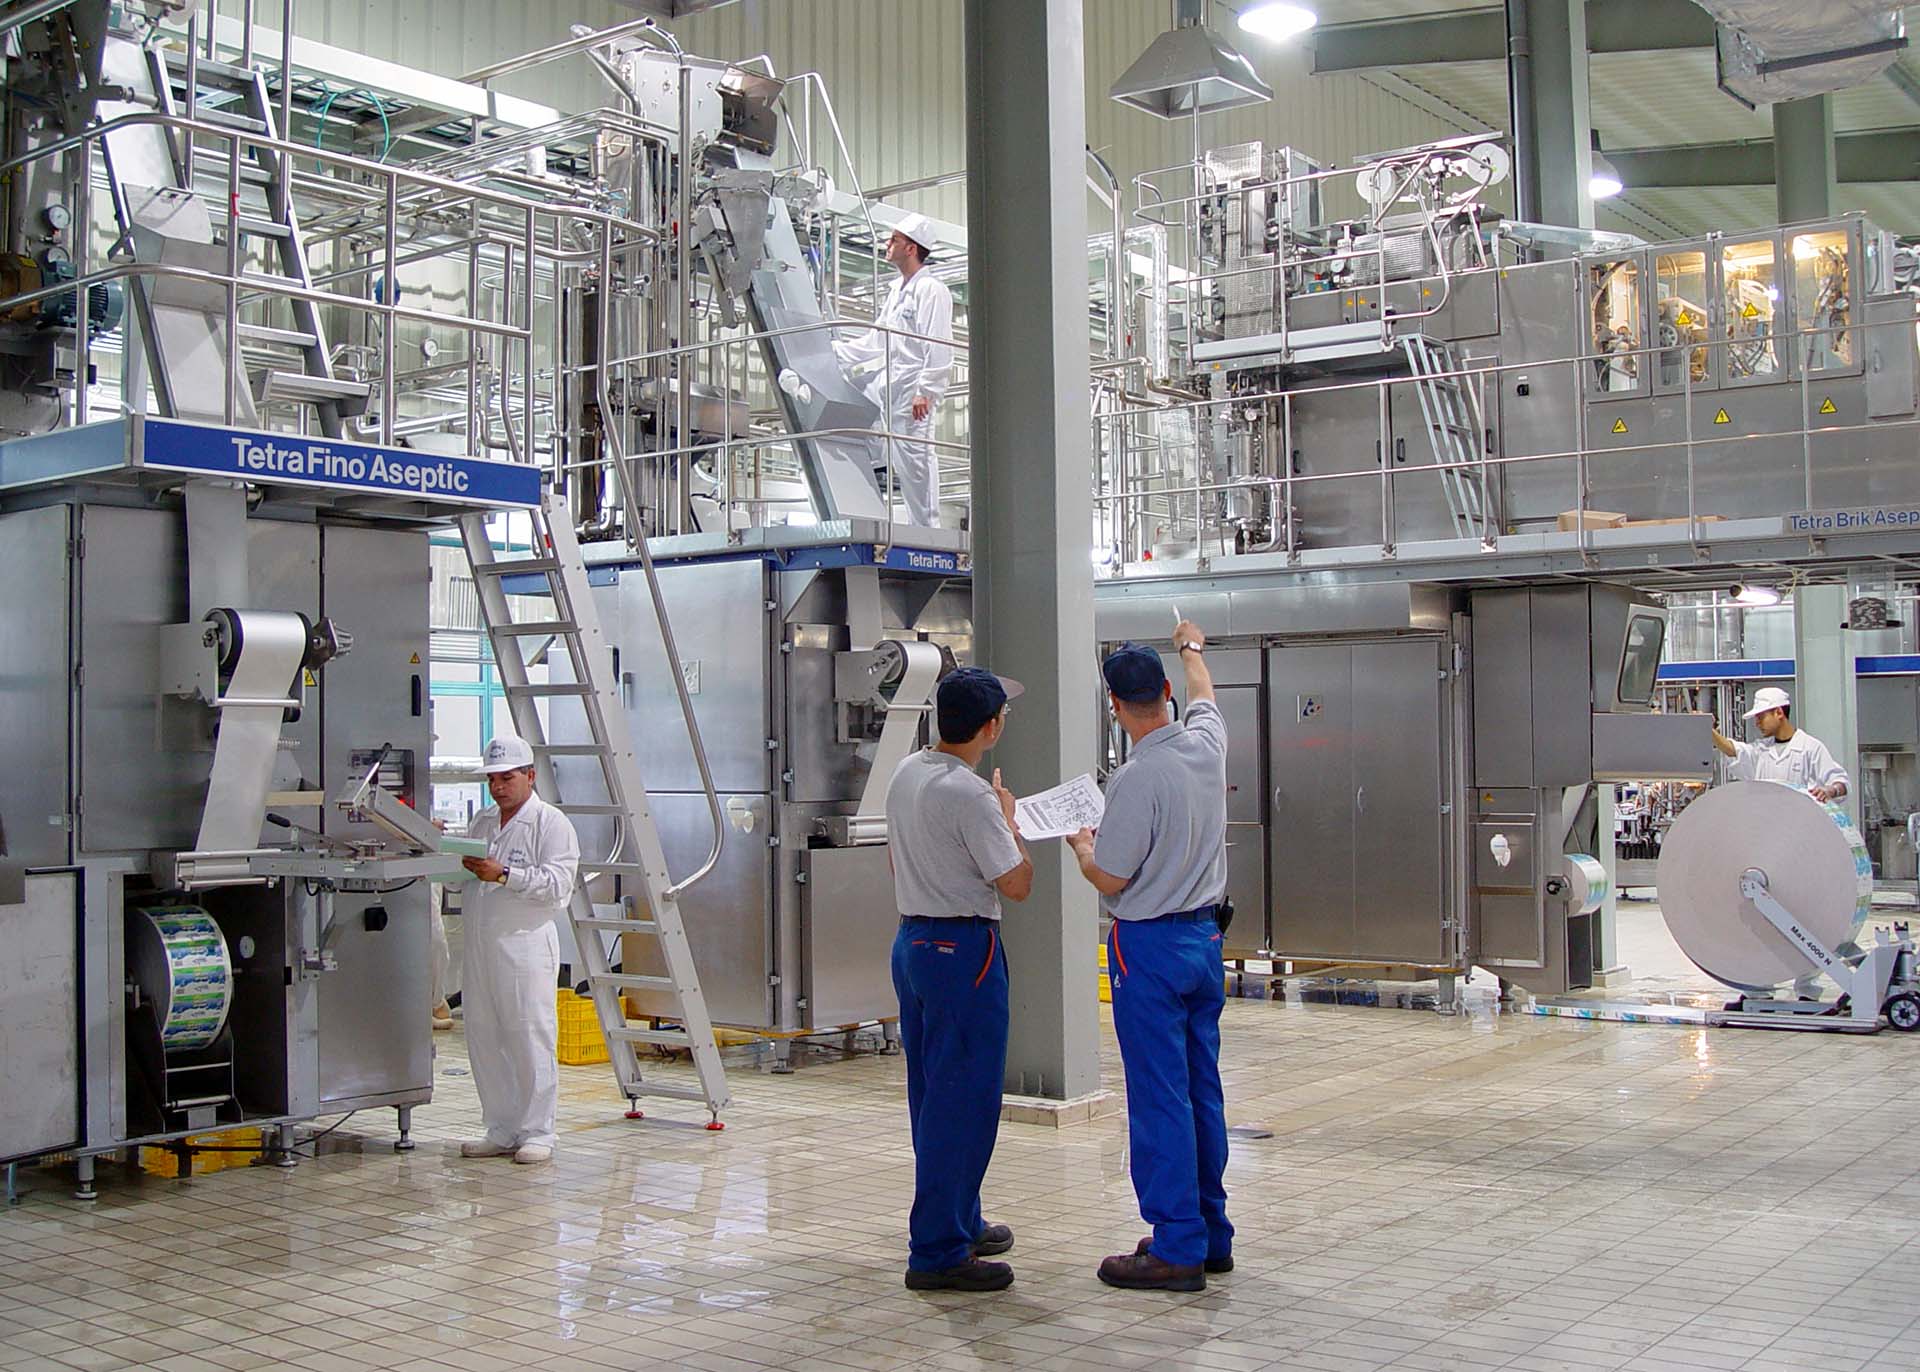 Team inspecting Tetra Pak processing equipment in an industrial setting.